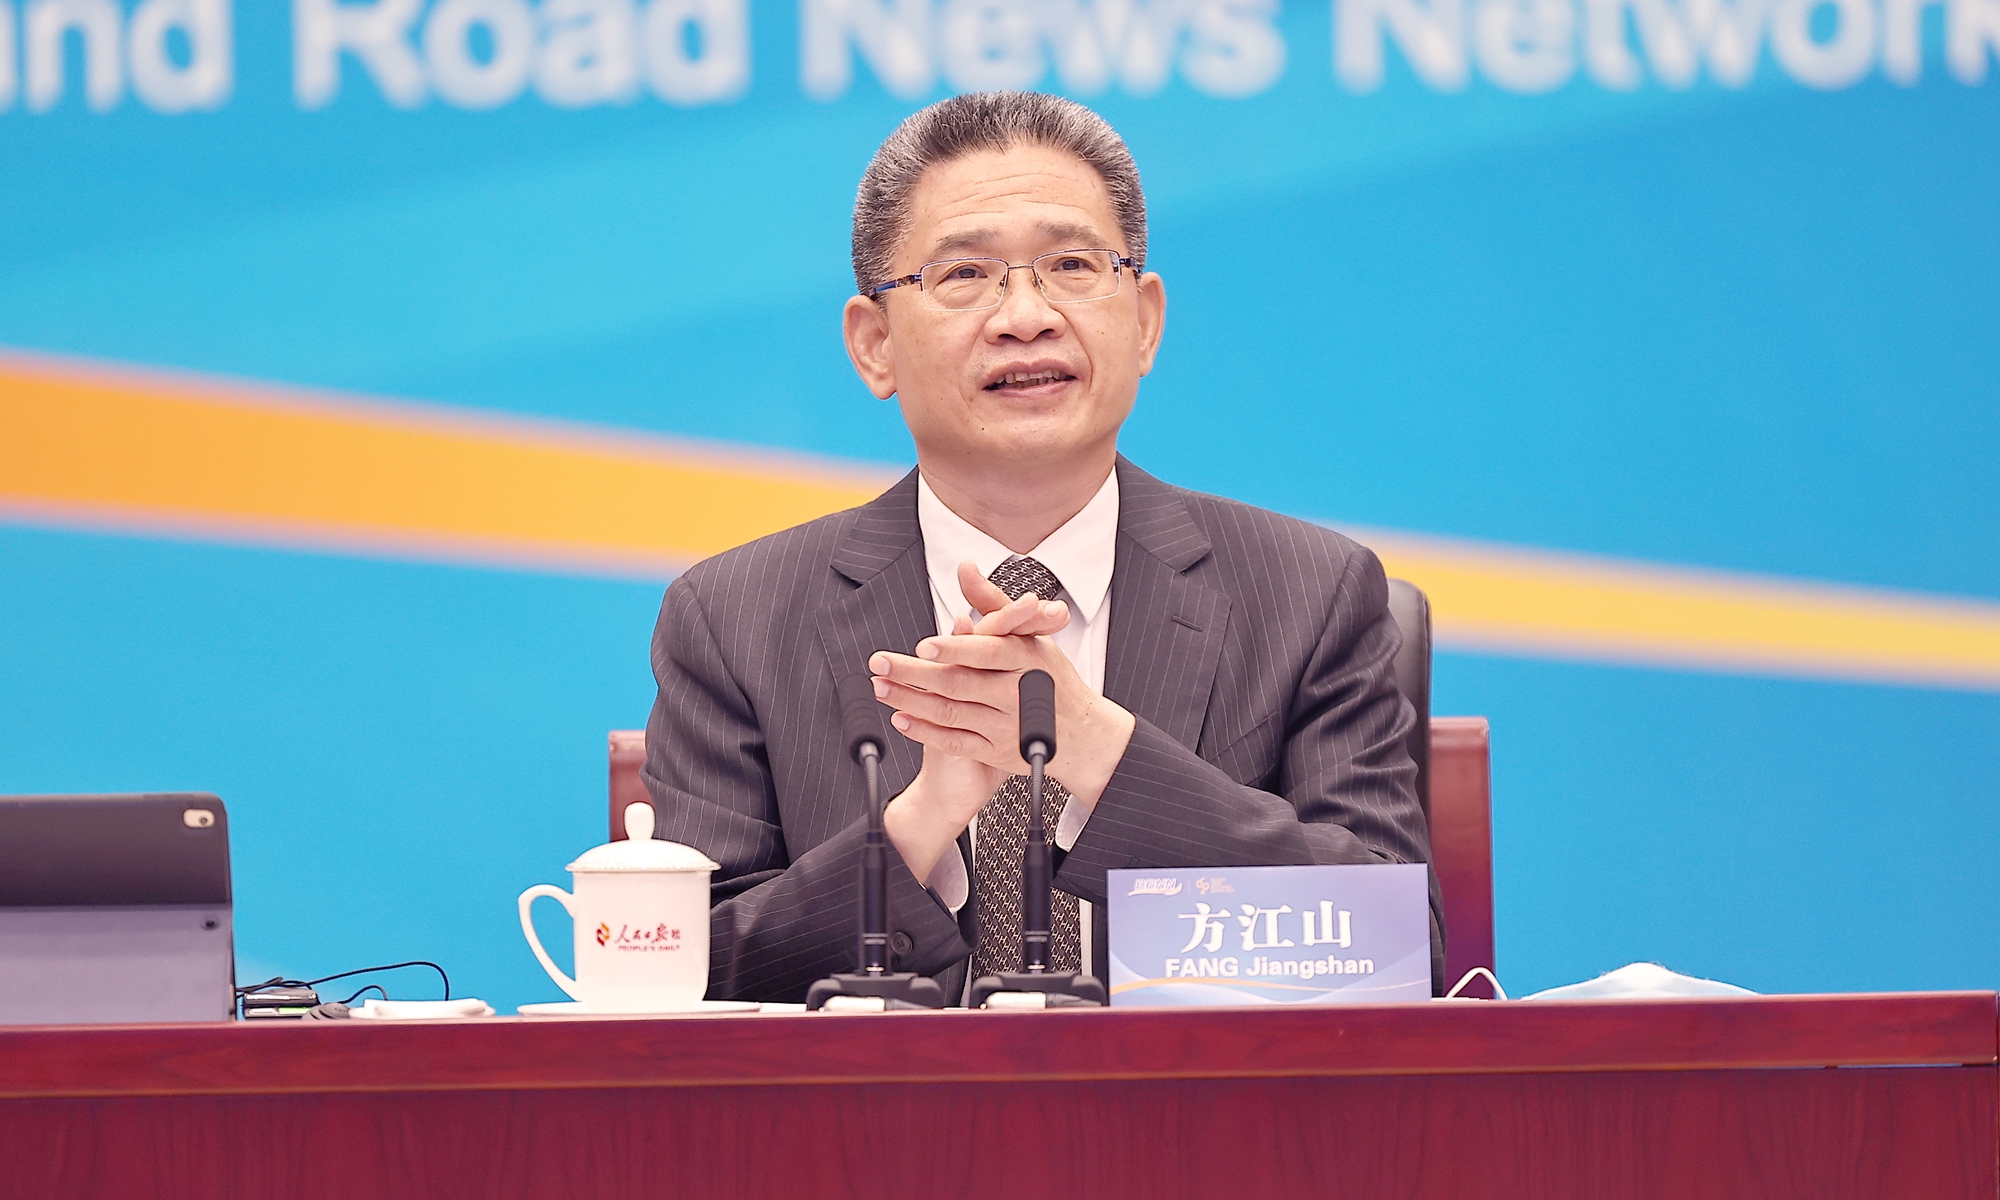 Fang Jiangshan, Deputy Editor-in-Chief of People's Daily and China Director of the Judging Committee for the First Silk Road Global News Awards Photo: People's Daily 